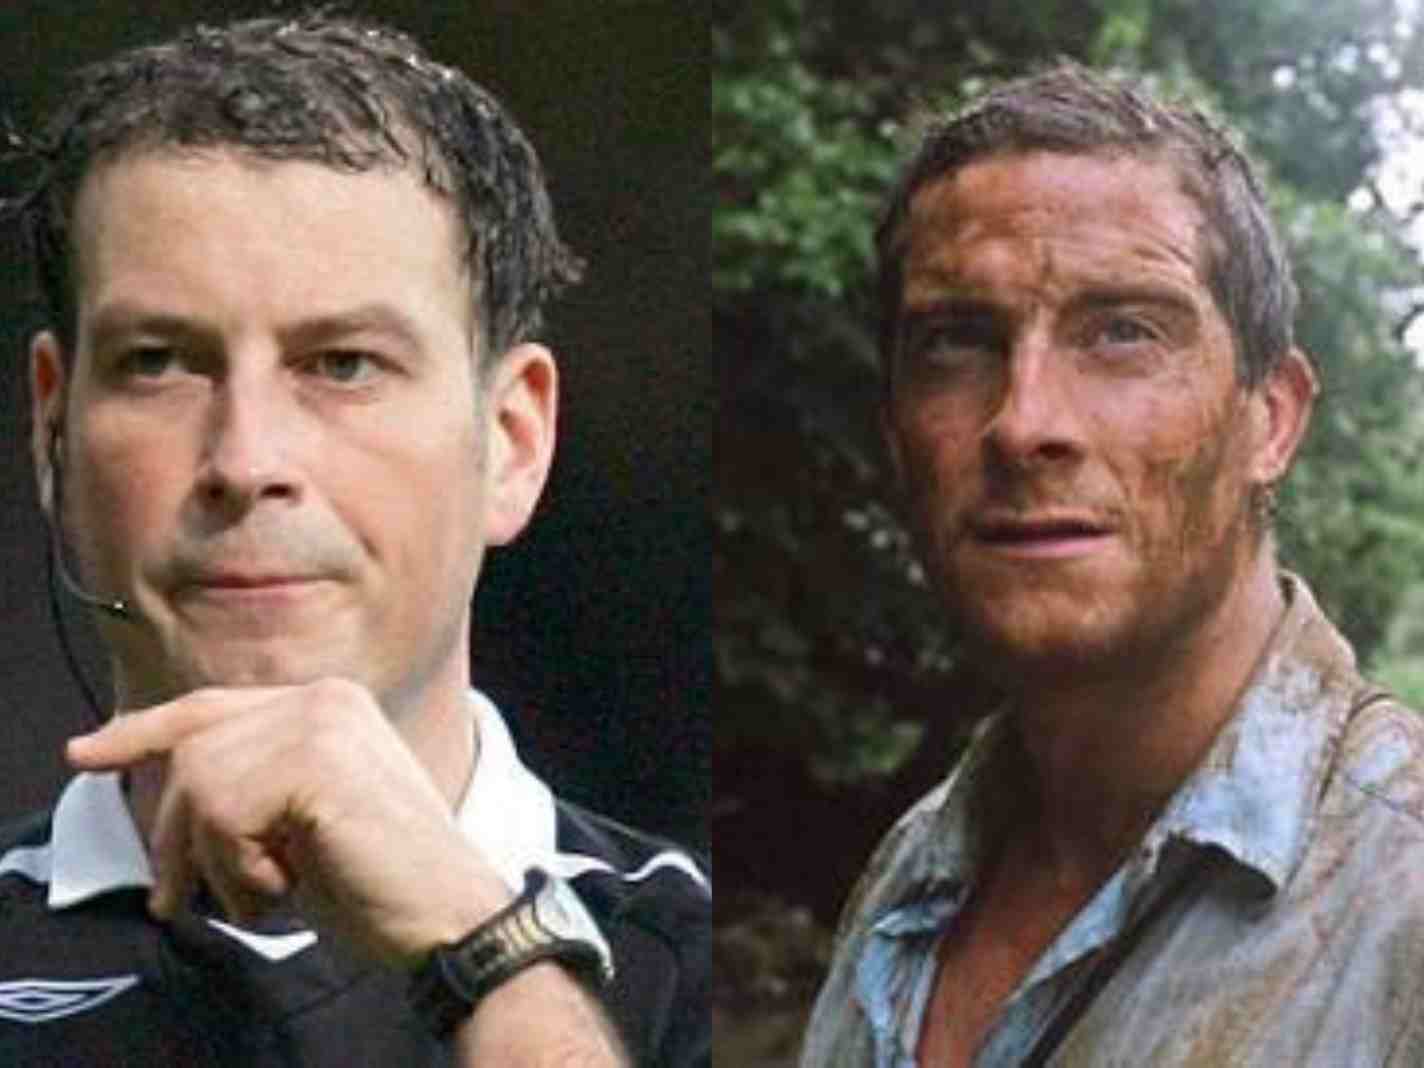 Who Knew Bear Grylls And Mark Clattenburg Looked So Alike